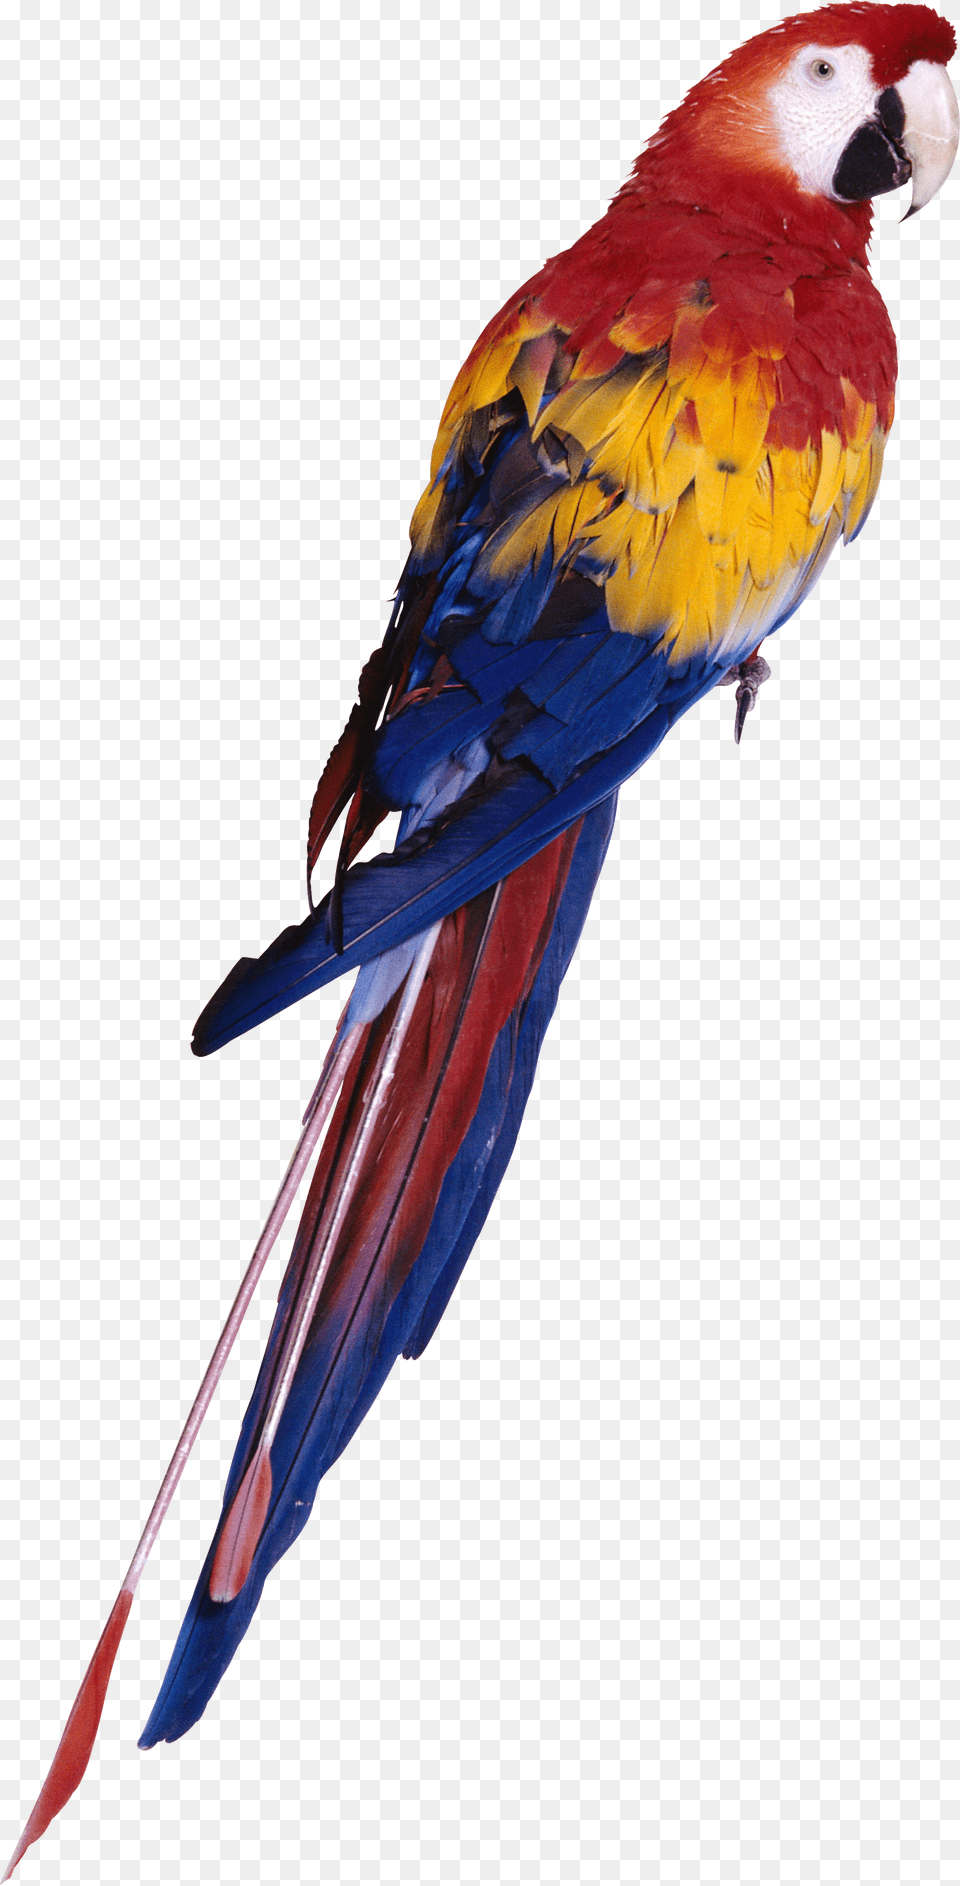 Tropical Animals Parrot Full Hd Png Image